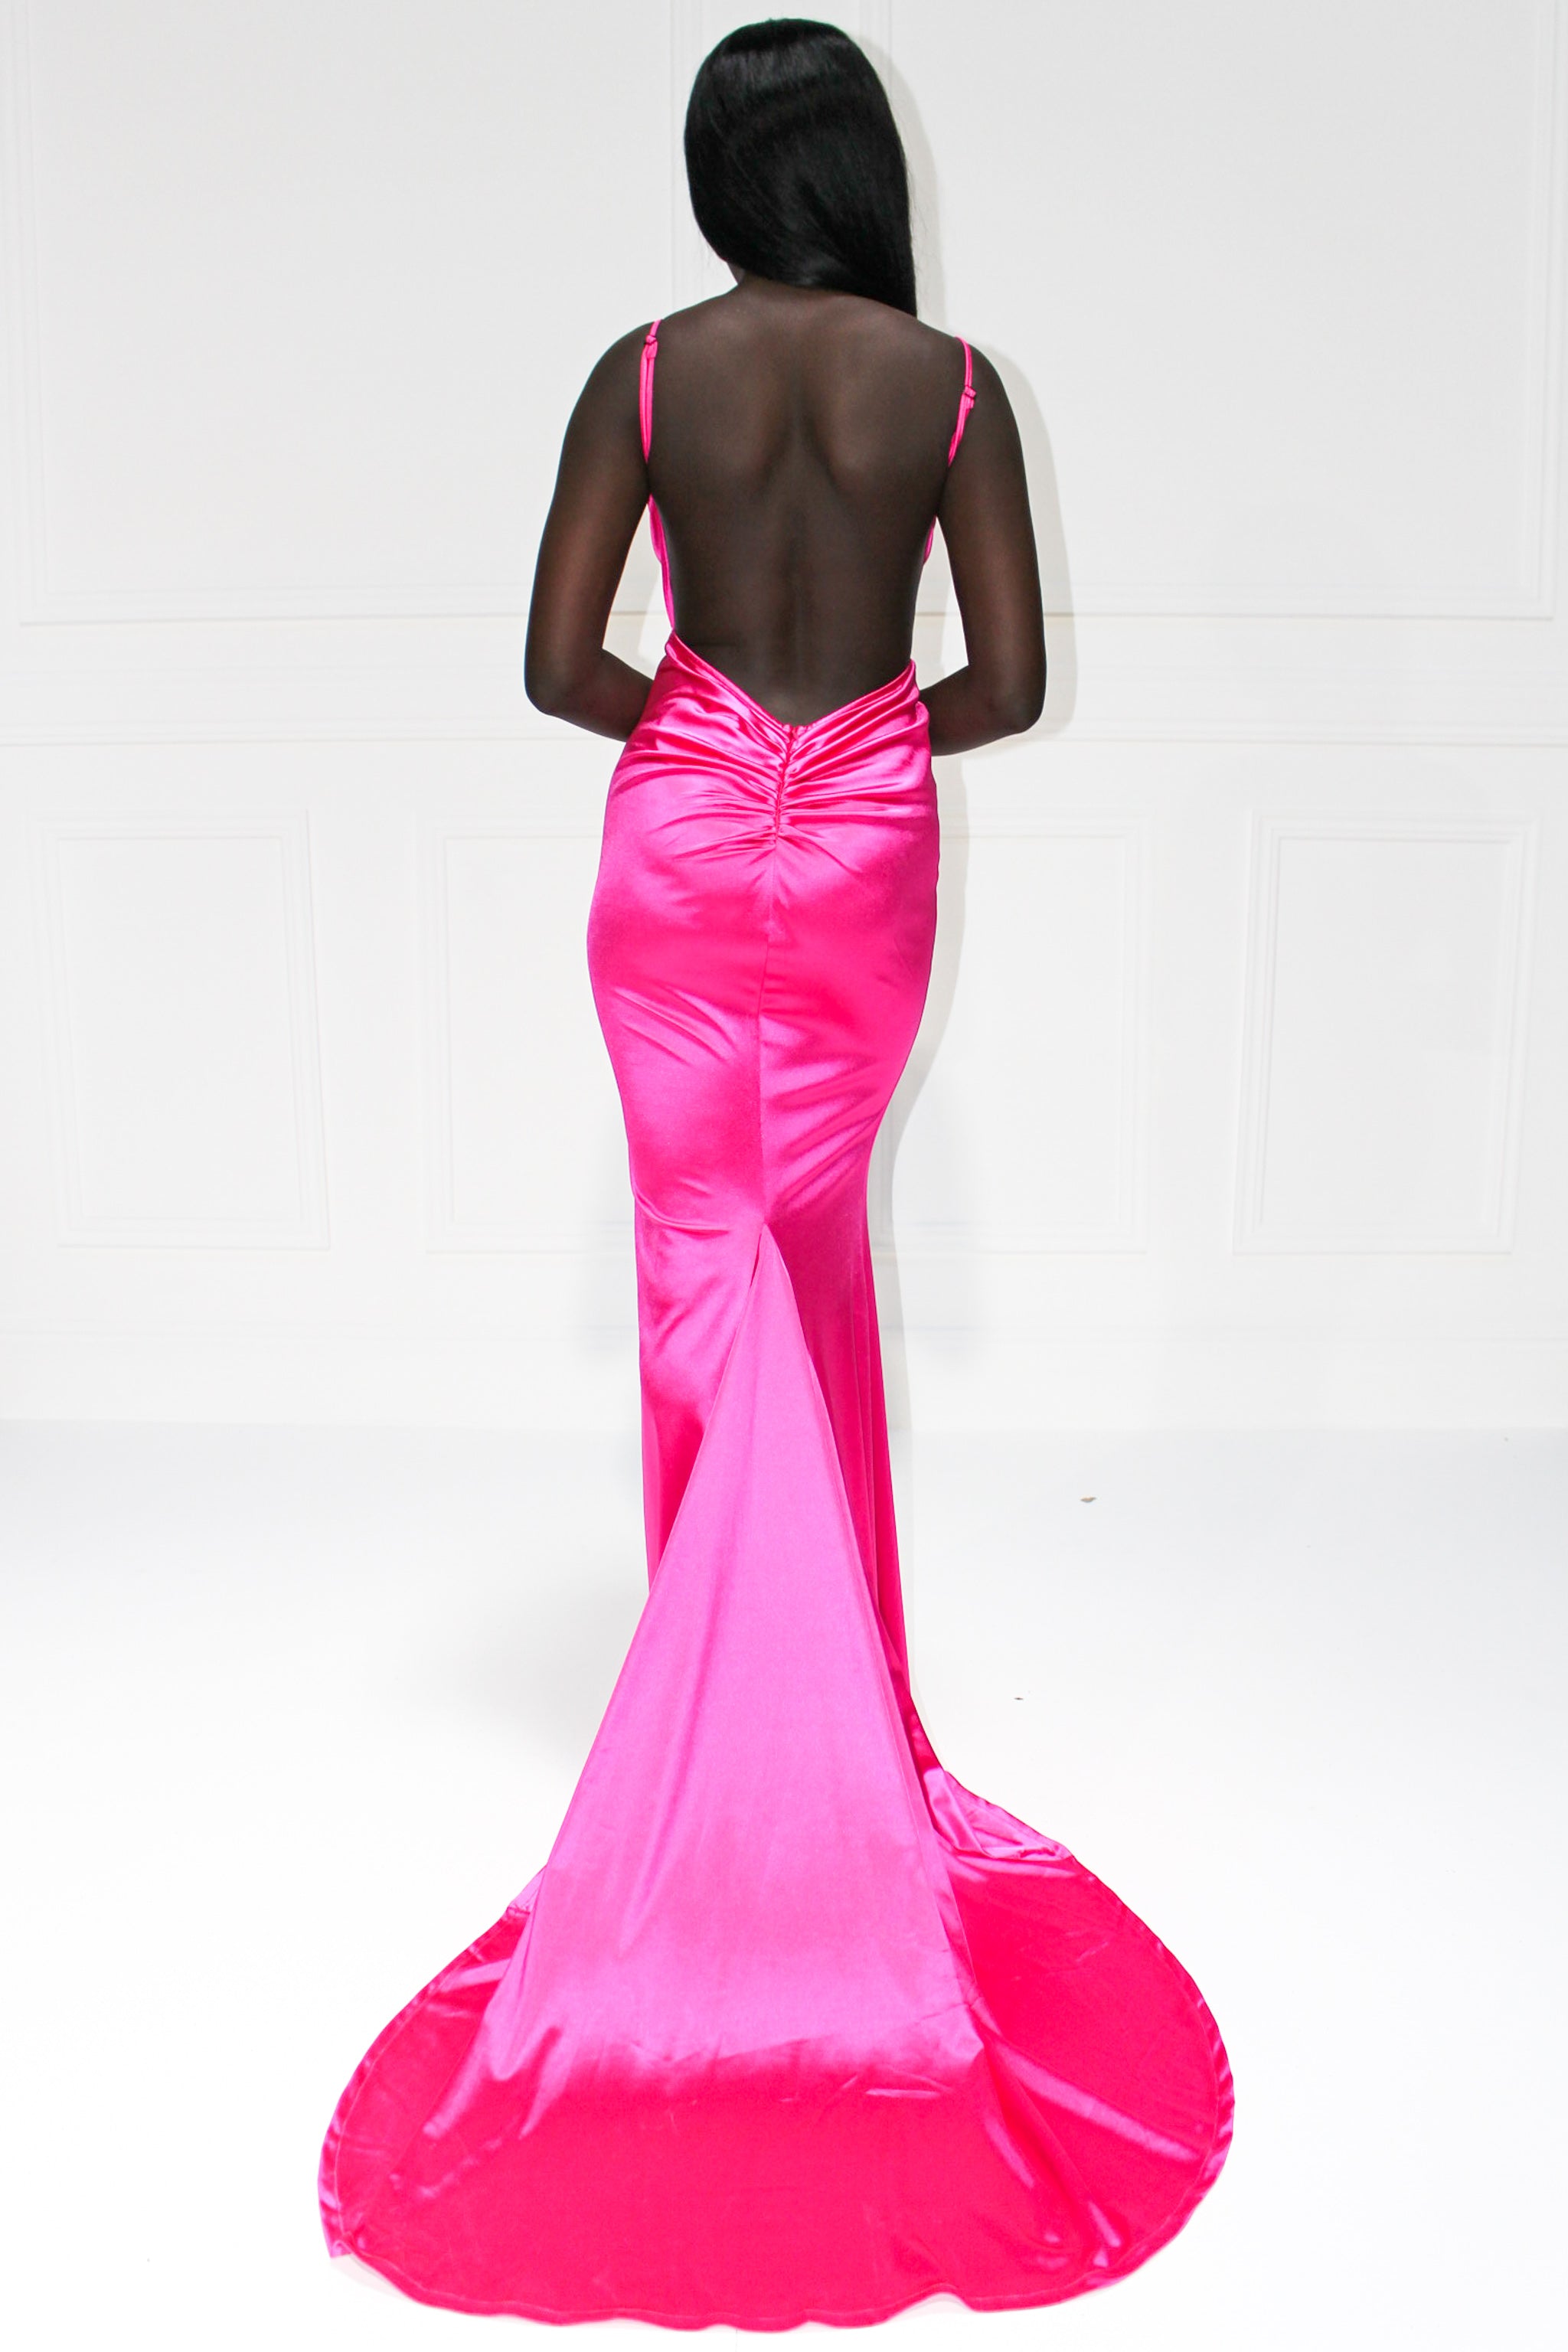 Honey Couture MILEE Hot Pink Low Back Mermaid Evening Gown Dress Honey Couture$ AfterPay Humm ZipPay LayBuy Sezzle